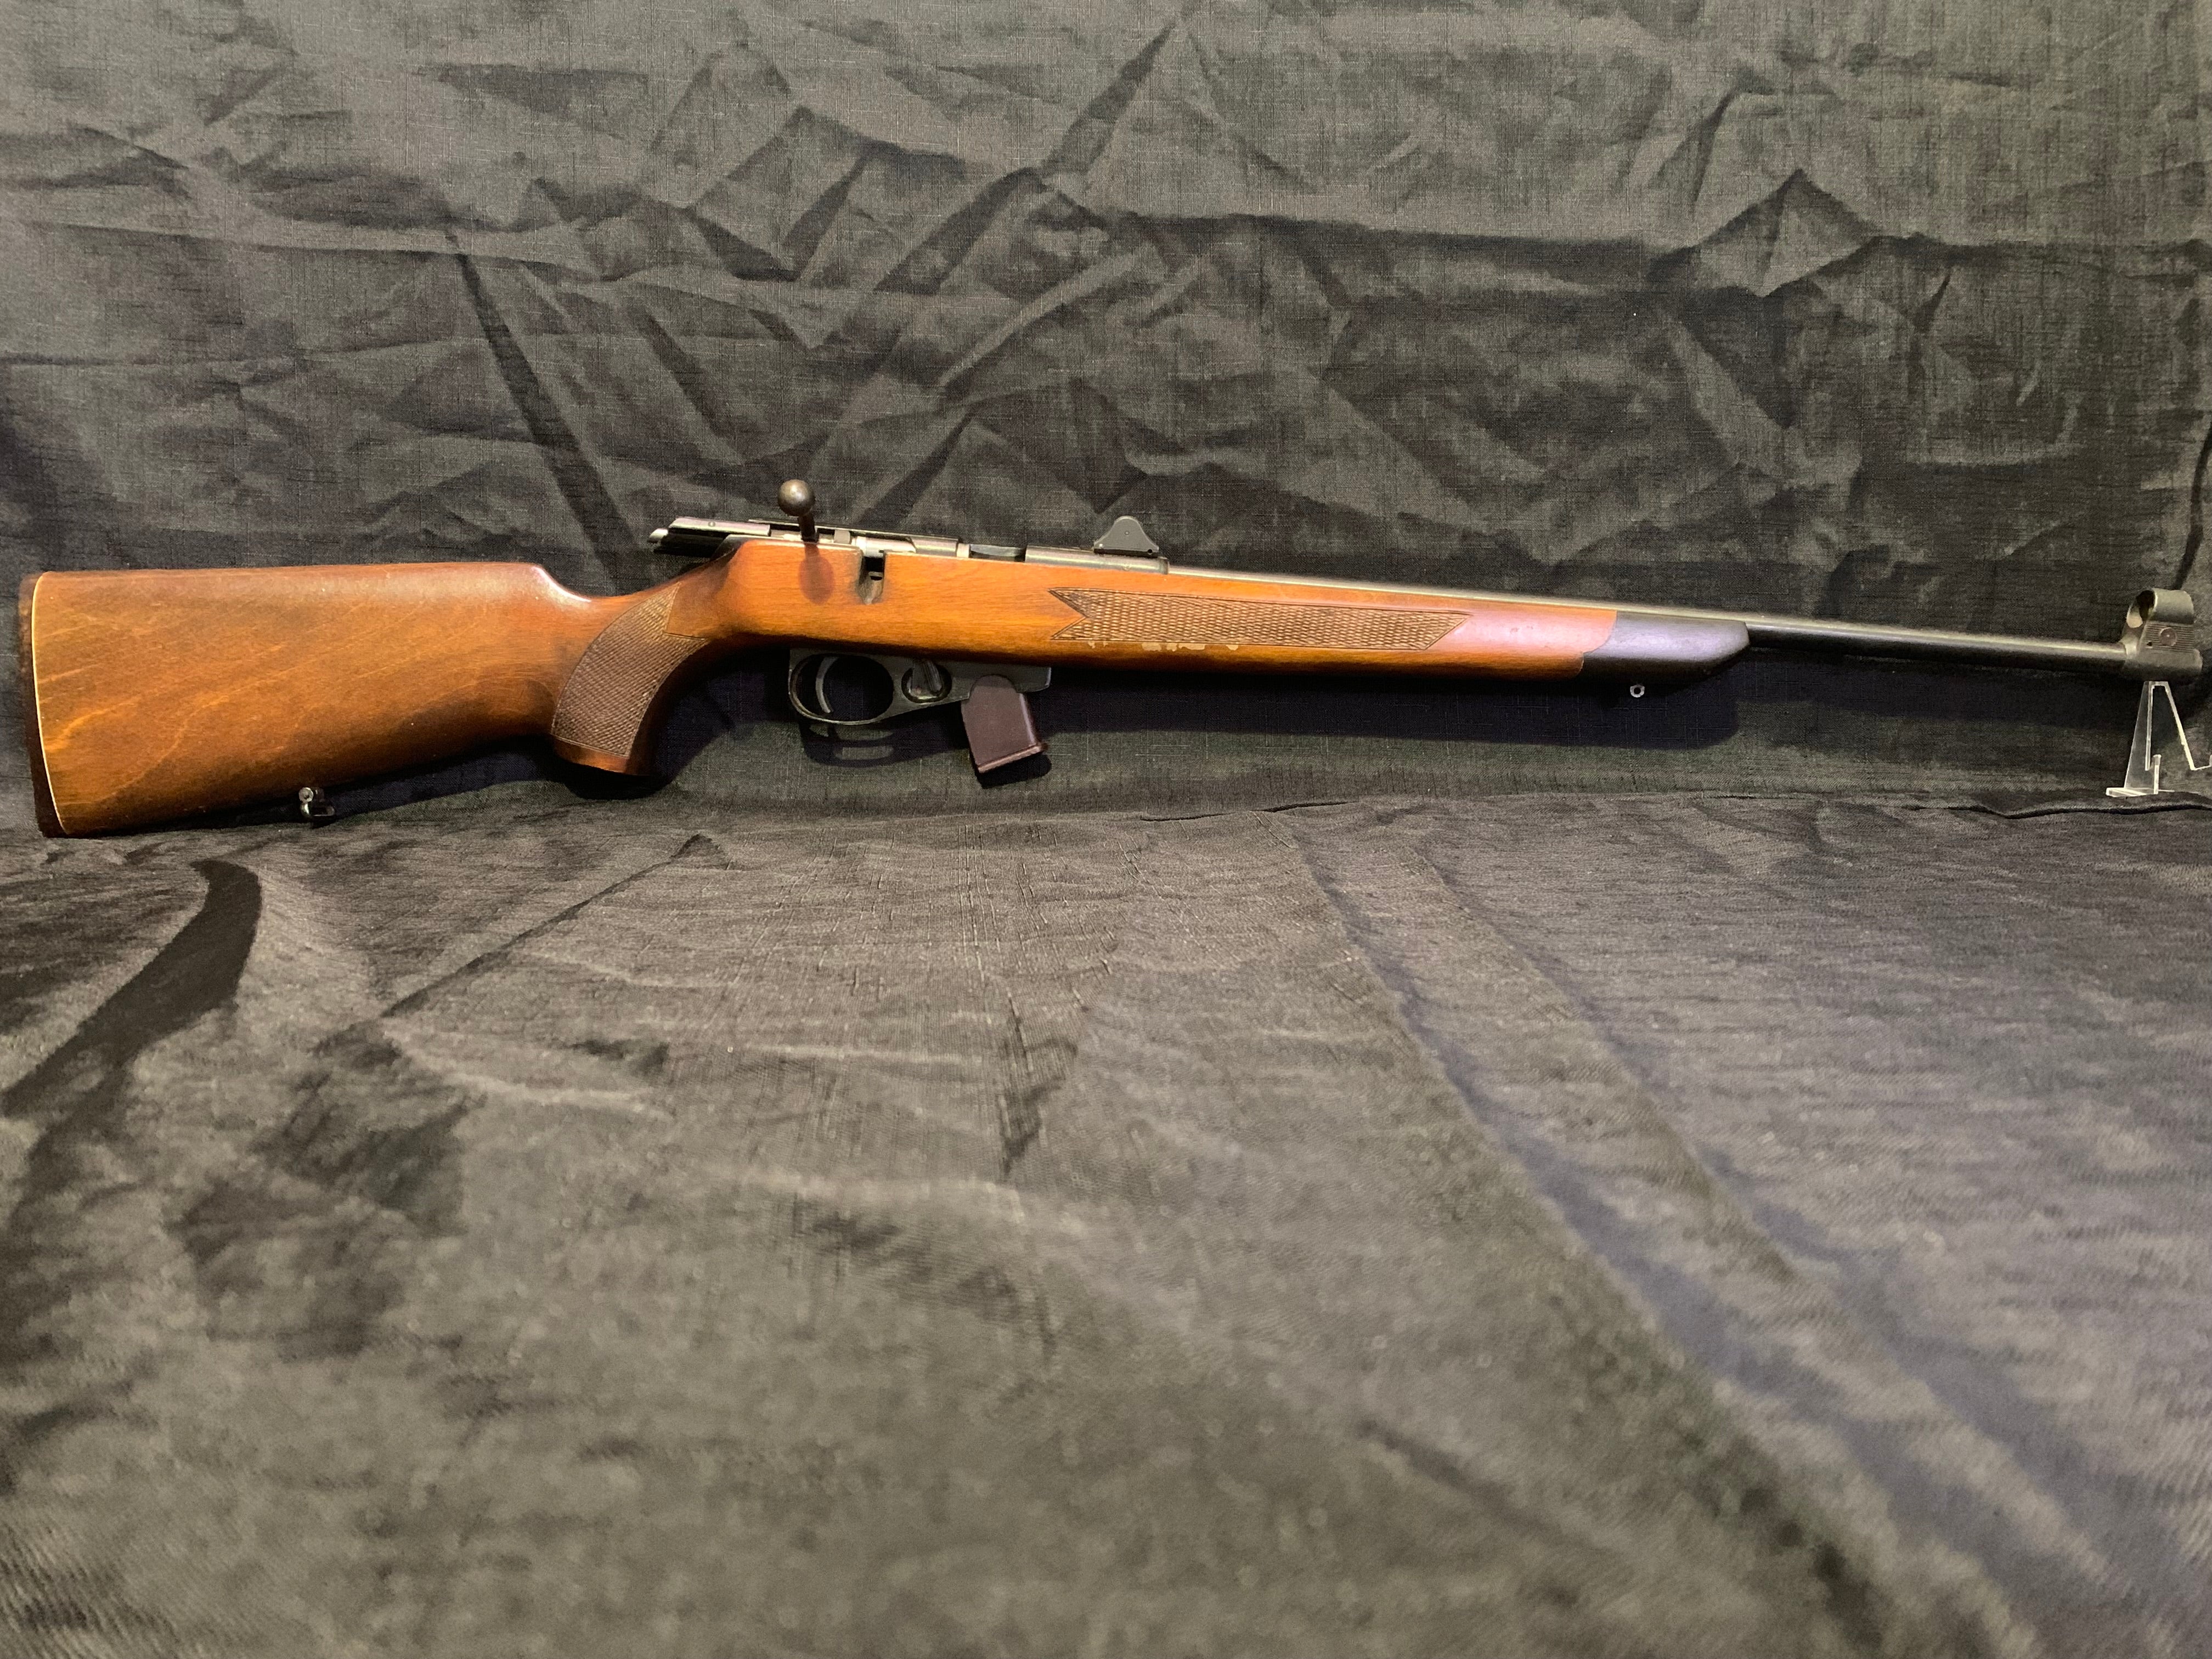 PREOWNED Toz T03 .22LR Rim Fire Bolt Repeater Rifle - Preowned, Rifle, Rimfire, Rimfire Rifle, Toz - Granbergs Firearms